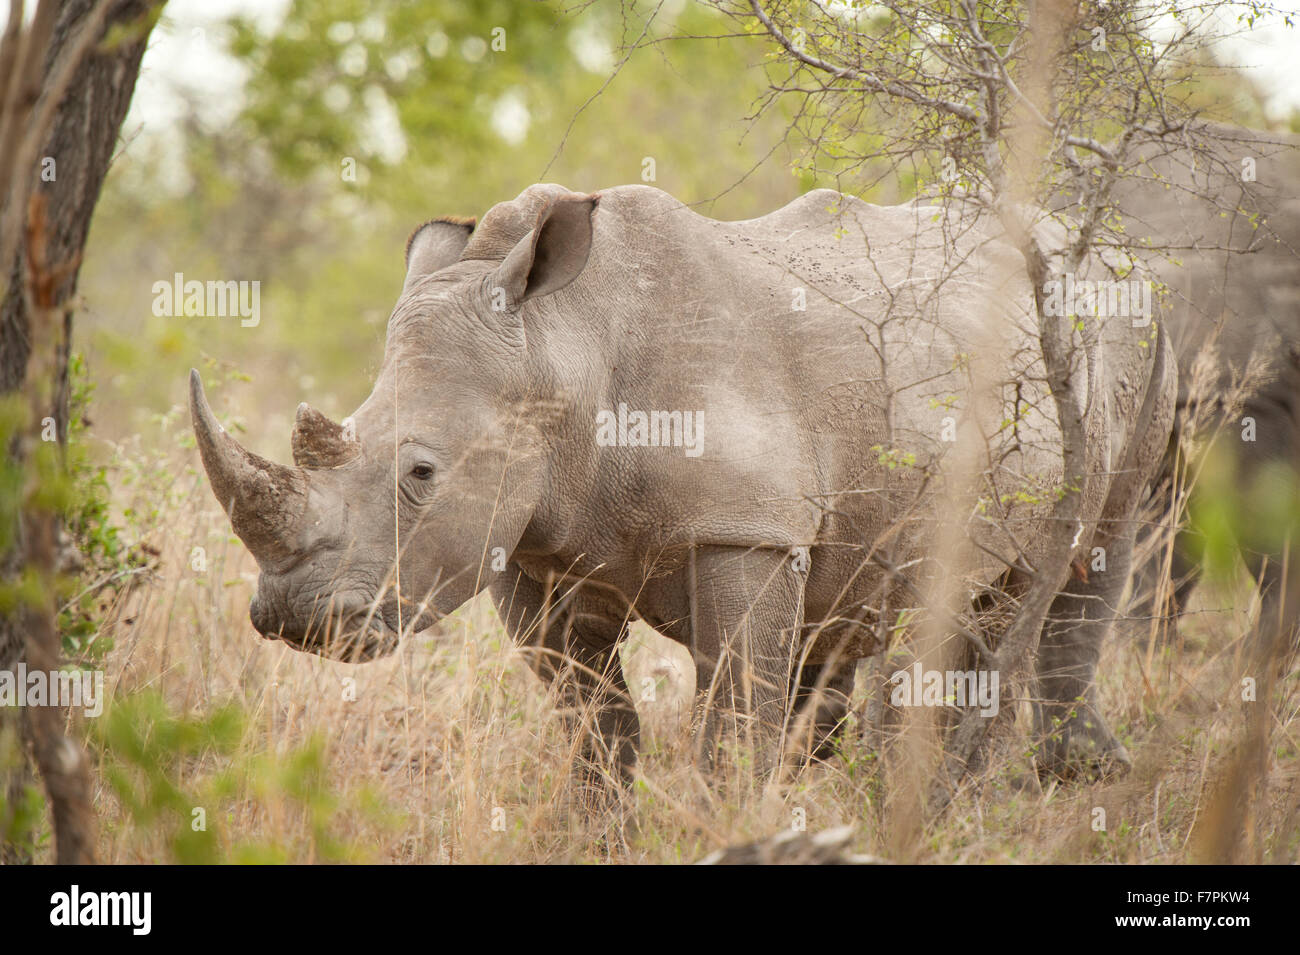 Rhinoceros graze by the side of the road in Kruger National Park, South Africa Stock Photo